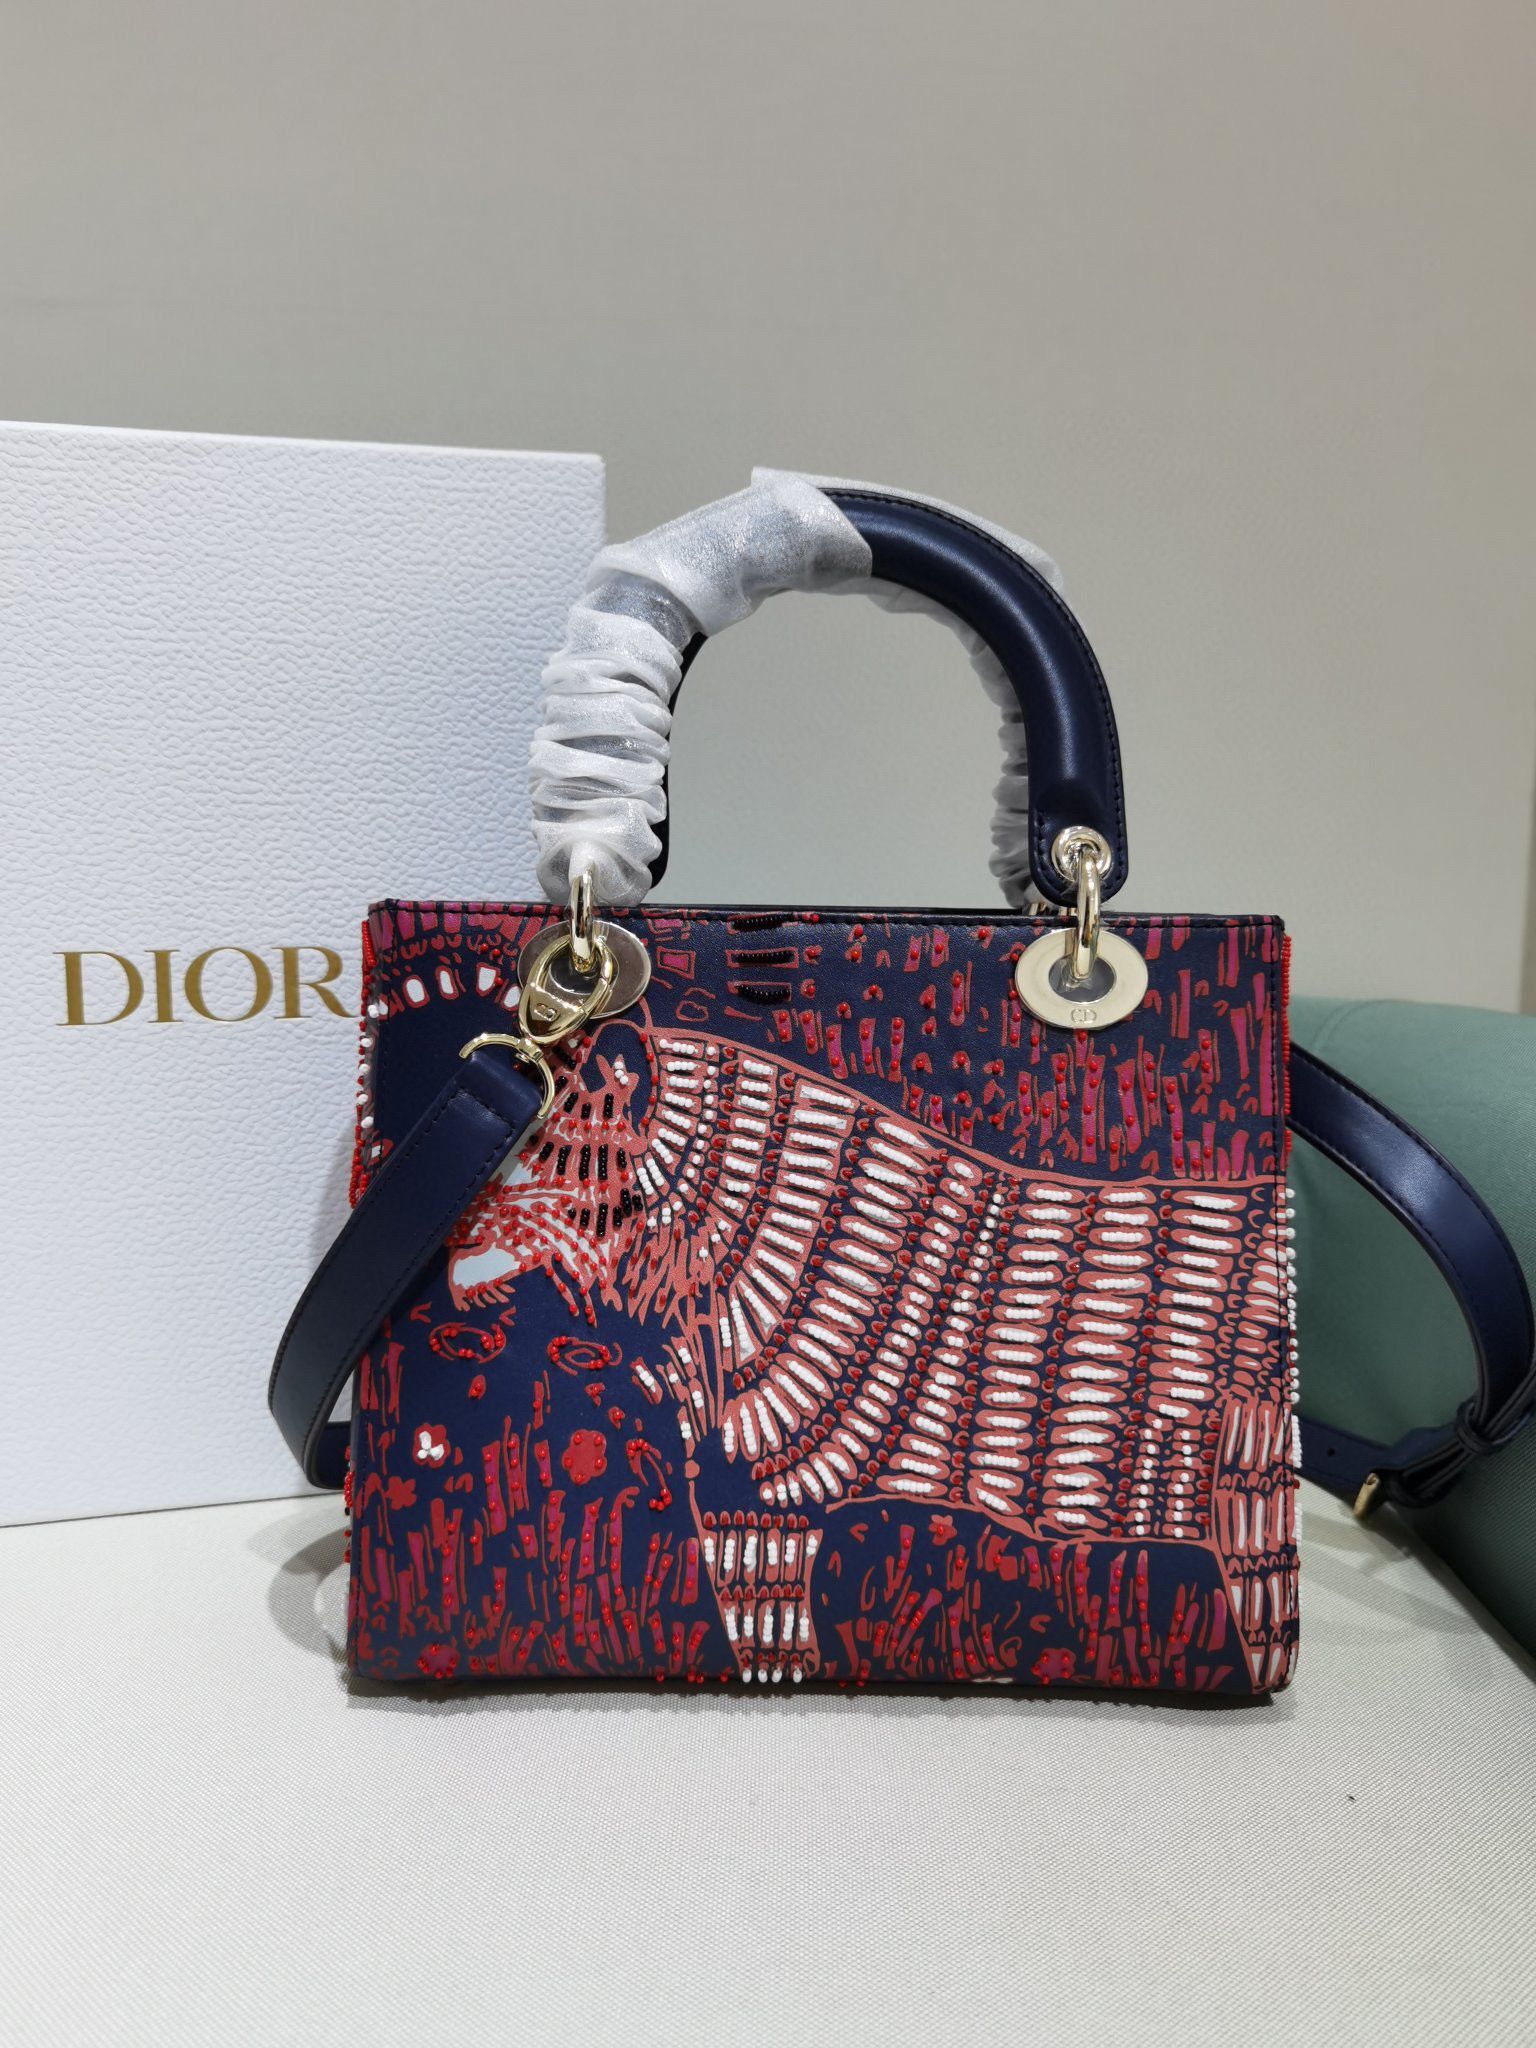 LADY DIOR DIOR TOTE EMBROIDERED CANVAS BAG 2553